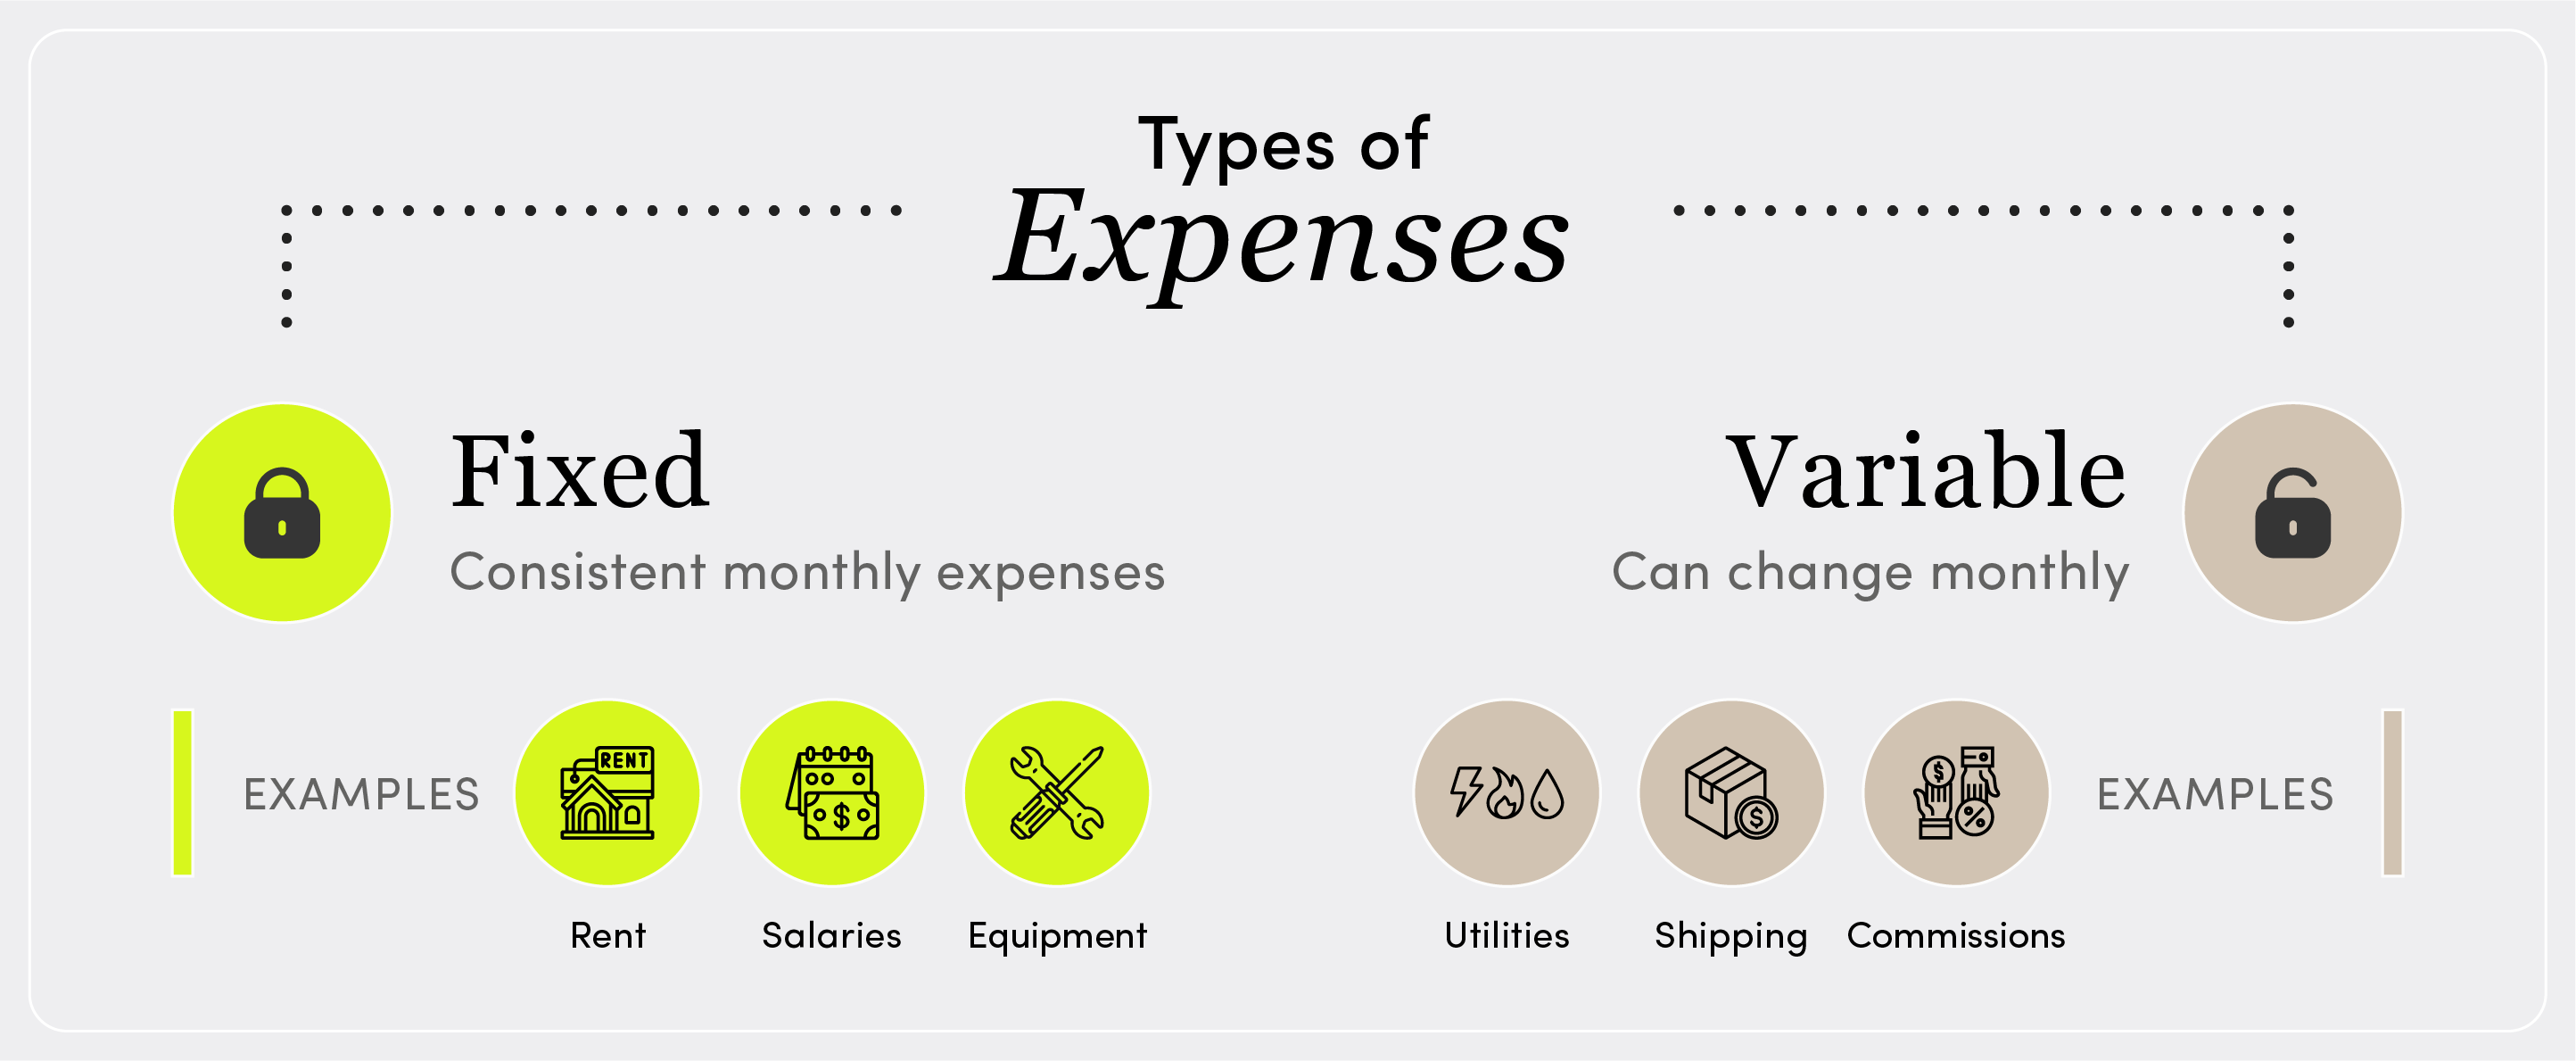 Types of expenses infographic